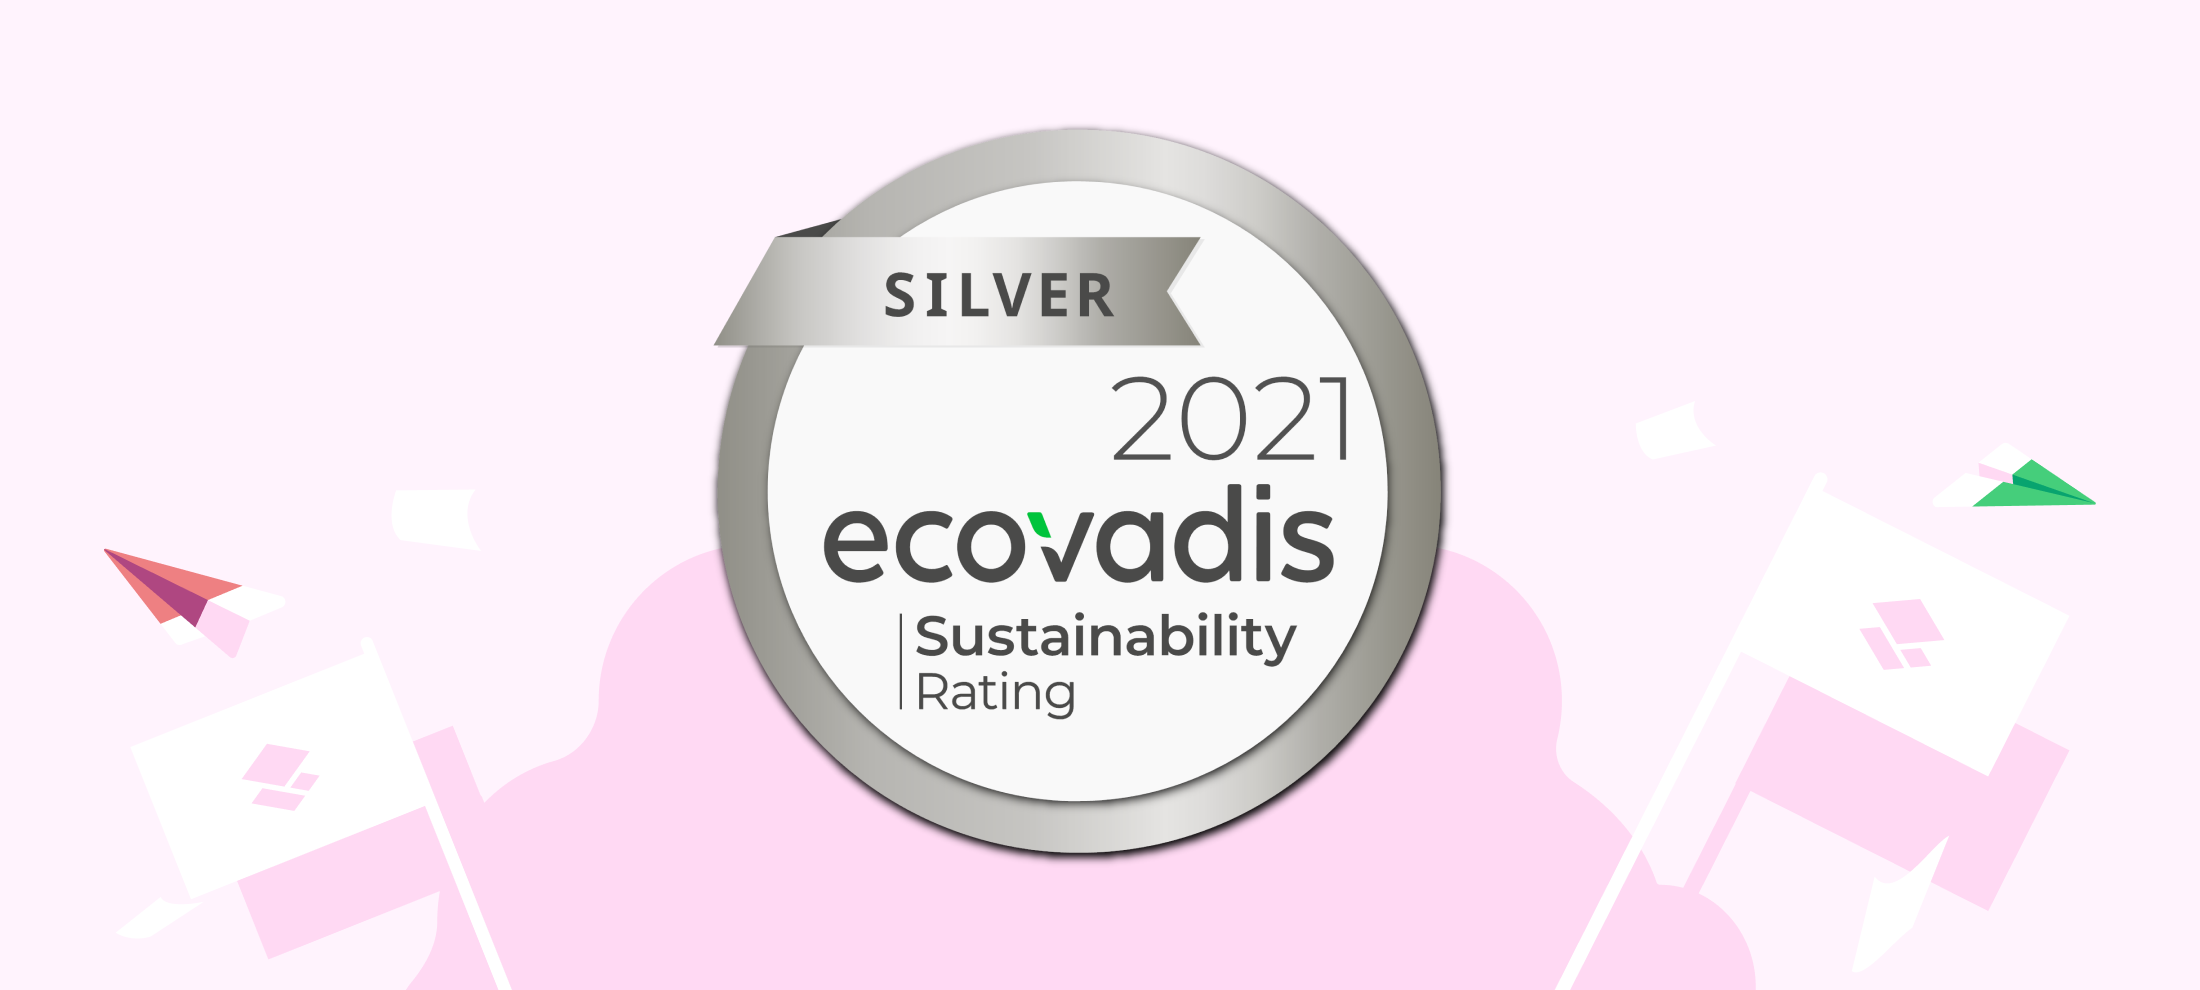 Stravito receives a silver medal in ecovadis sustainabilty rating